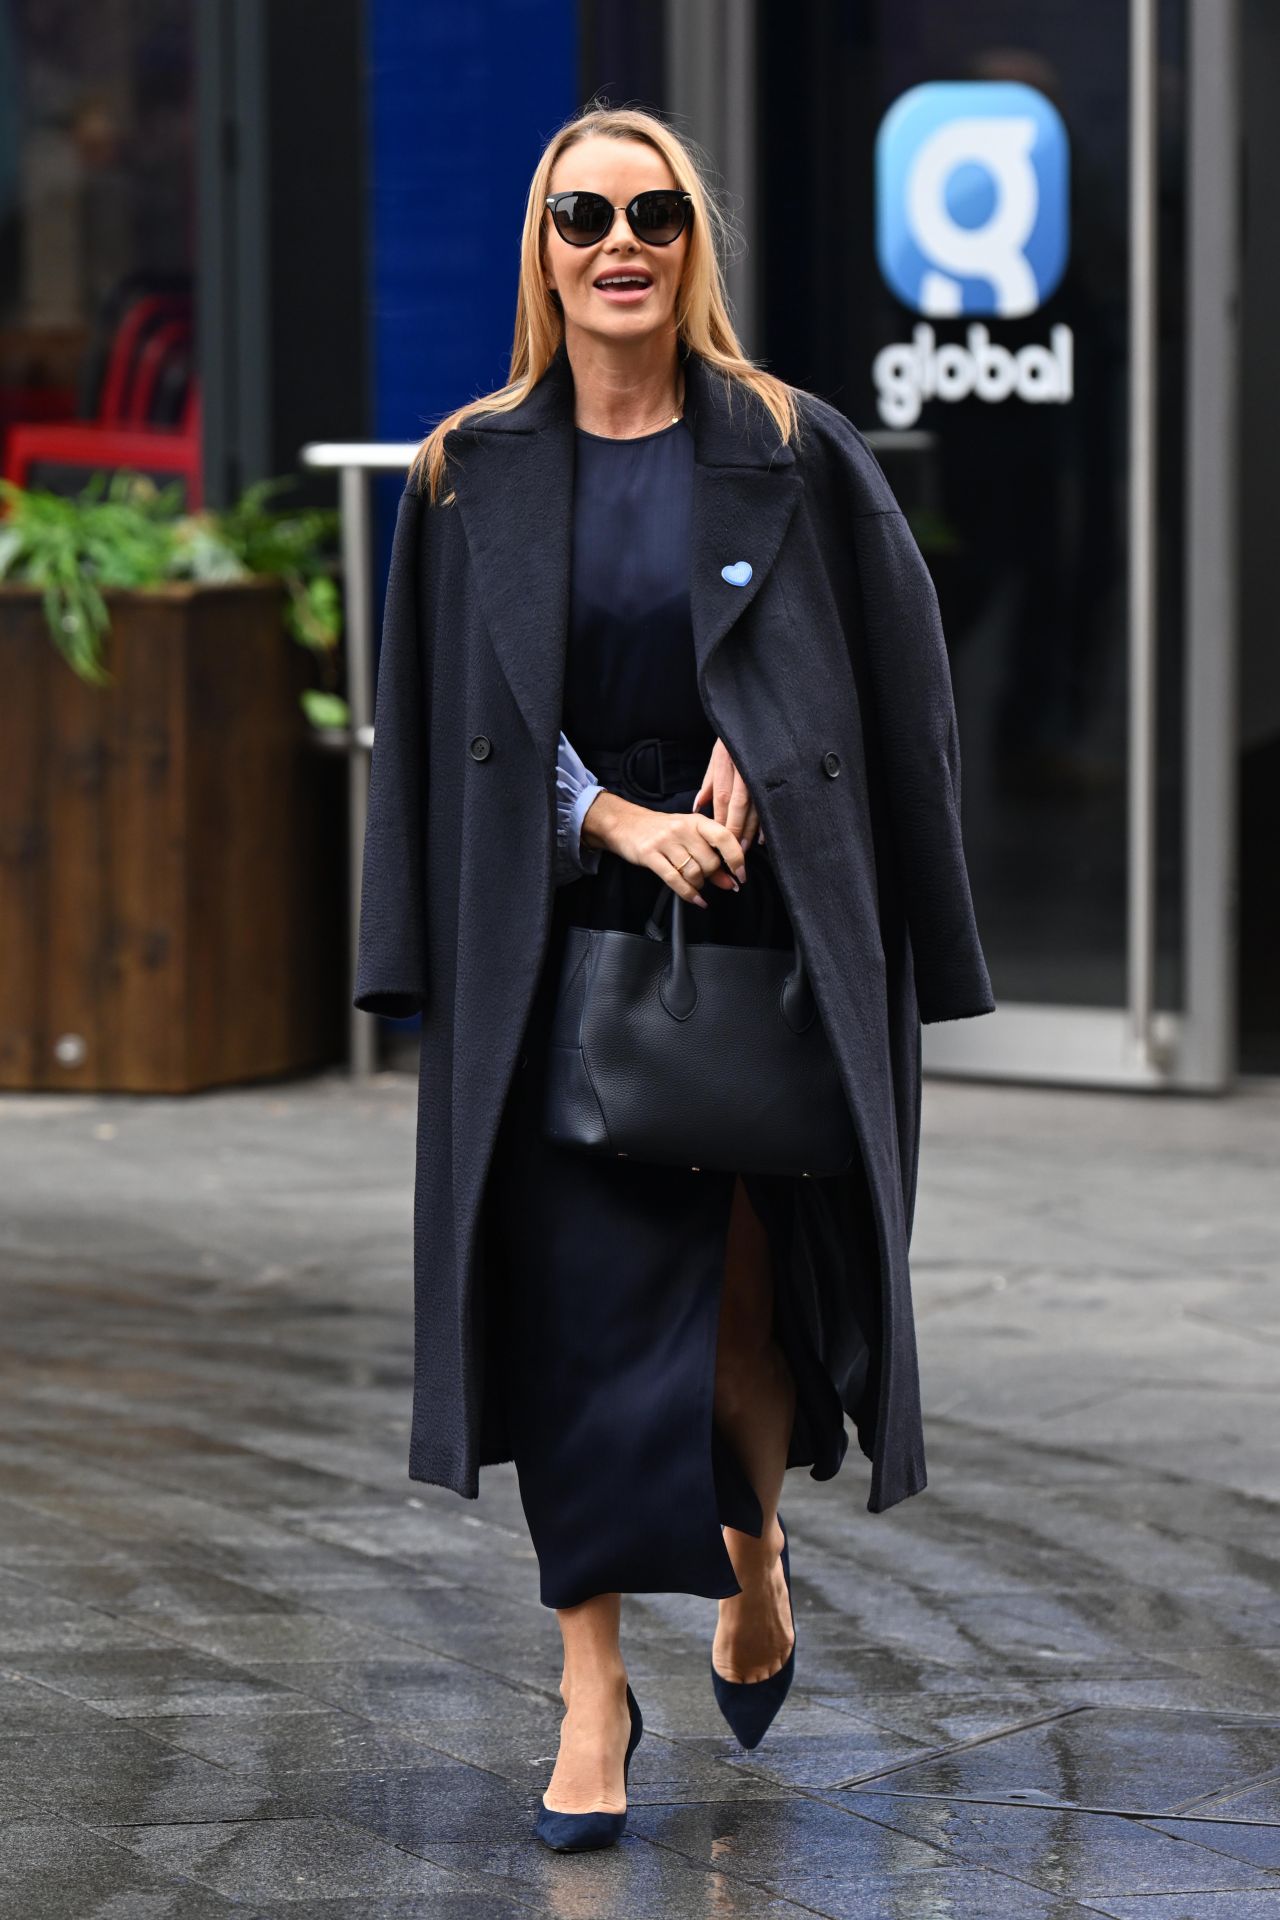 Amanda Holden goes braless as she makes an energetic exit from